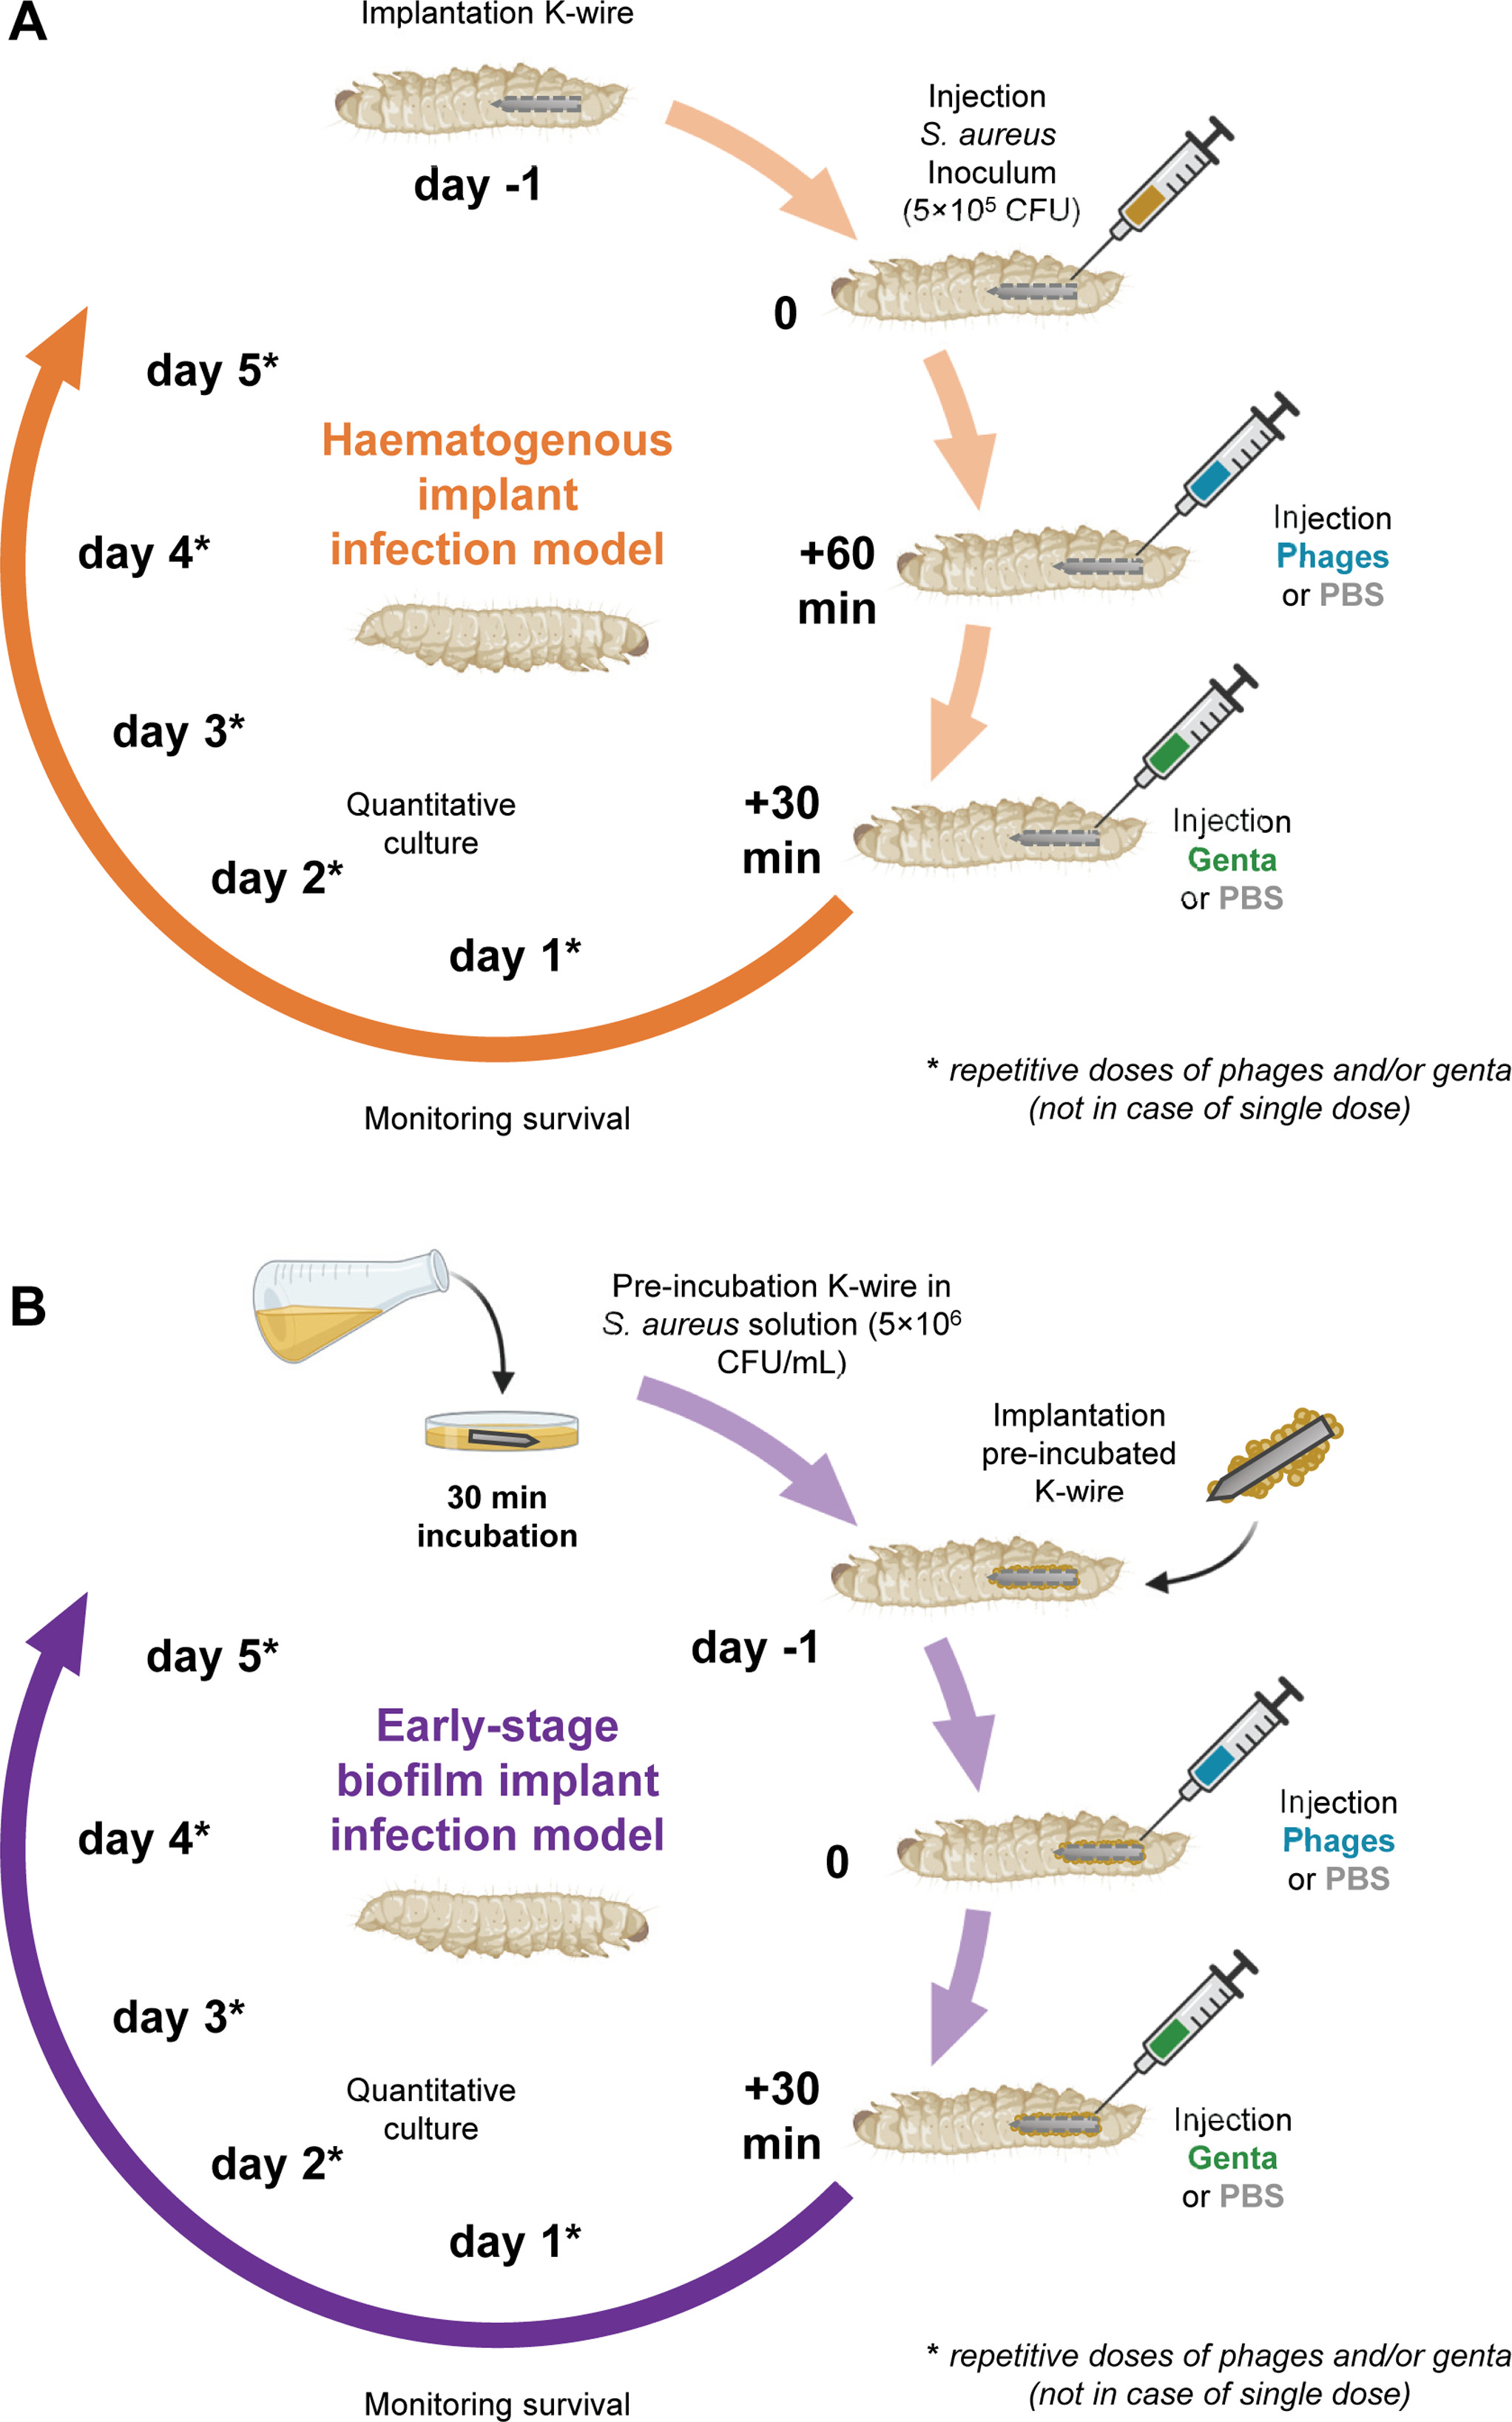 Fig. 1 
            Schematic overview of the Galleria mellonella implant-infection models used in this study. a) Haematogenous implant infection model: a sterile stainless steel Kirschner wire (K-wire) was implanted in the larva, and 10 µl Staphylococcus aureus inoculum (5 × 105 colony forming units (CFUs)/larva) was injected the following day. b) Early-stage biofilm implant infection model: a K-wire was incubated in a S. aureus solution (5 × 106 CFUs/ml) for 30 minutes before implantation in the larva. Either at 60 minutes after infection (haematogenous implant infection model) or 24 hours after implantation of the pre-incubated implant (early-stage biofilm implant model), the larvae received an injection of 10 µl bacteriophages (‘Phages’) or phosphate-buffered saline (PBS), followed by an injection of 5 µl gentamicin (‘Genta’) or PBS 30 minutes later. The survival of the larvae was monitored for five days. In the case of repetitive doses, the injections with antimicrobial solutions or PBS were repeated daily following the same procedure. Each experimental group contained 30 larvae. At two days after infection, the number of CFUs at the implant surface and in the tissue of the larvae was quantitatively determined (additional larvae, n = 15 per group).
          